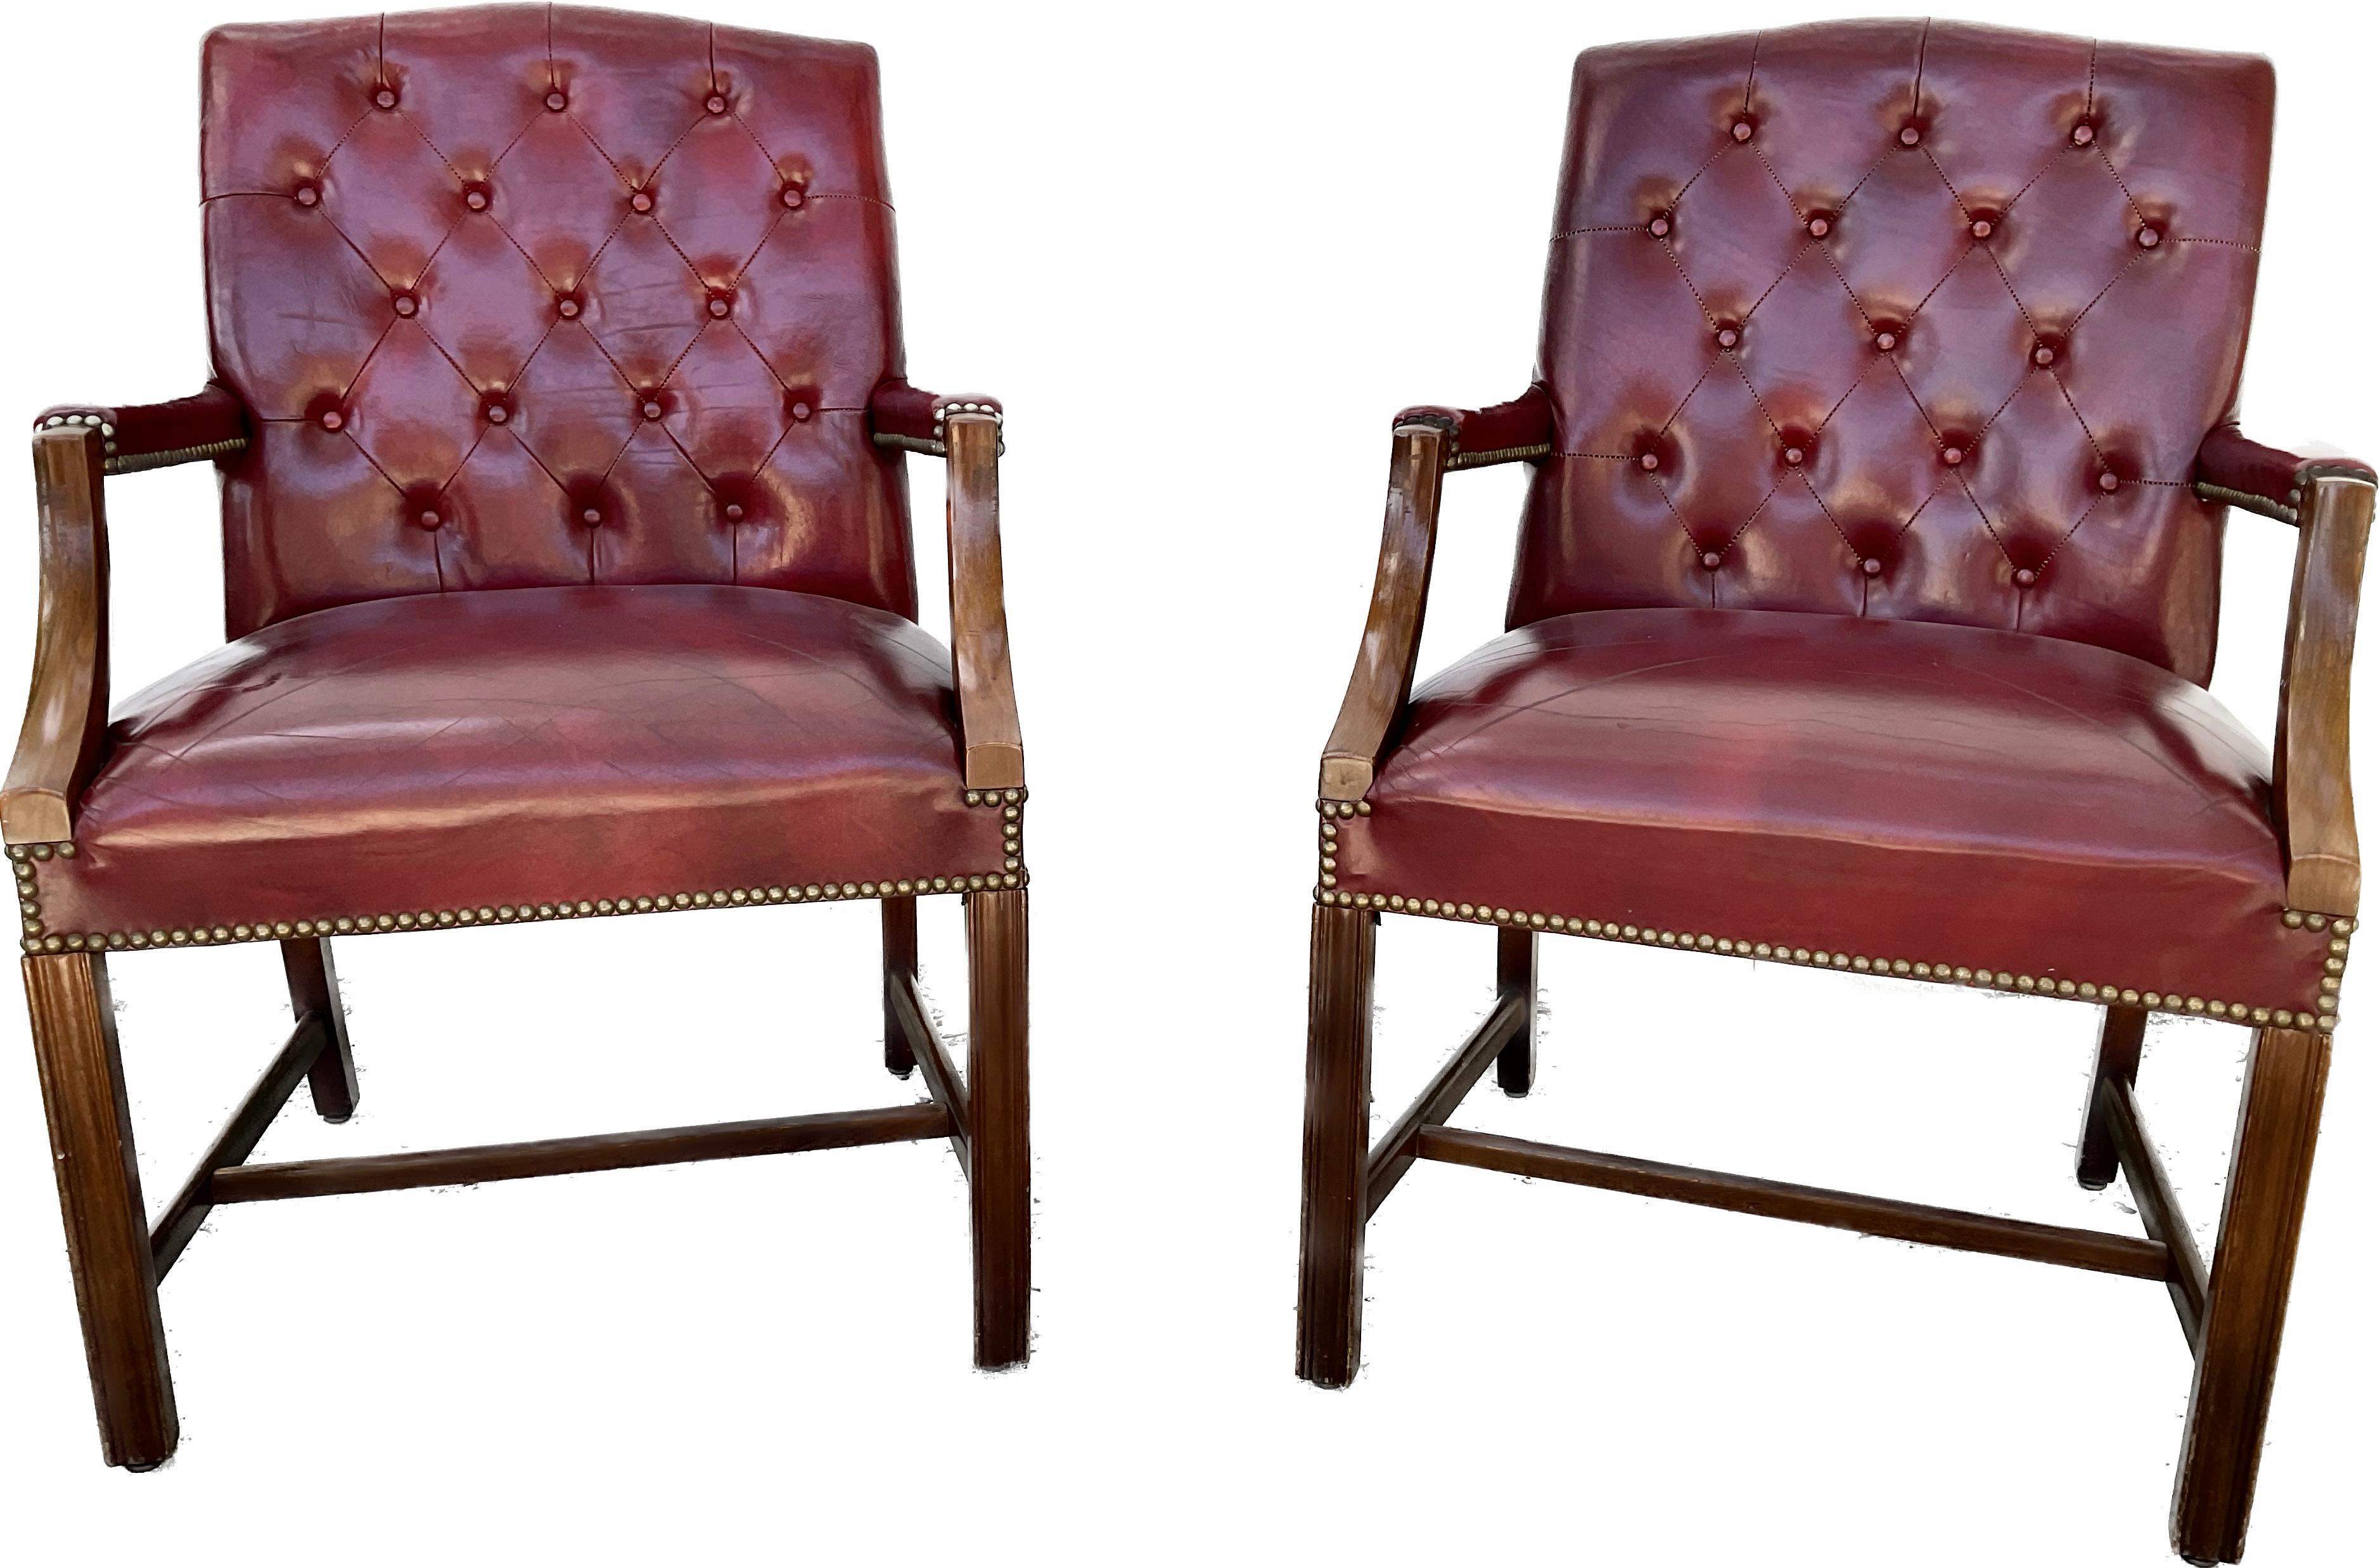 20th Century Pair of Tufted Leather Chesterfield Armchairs For Sale